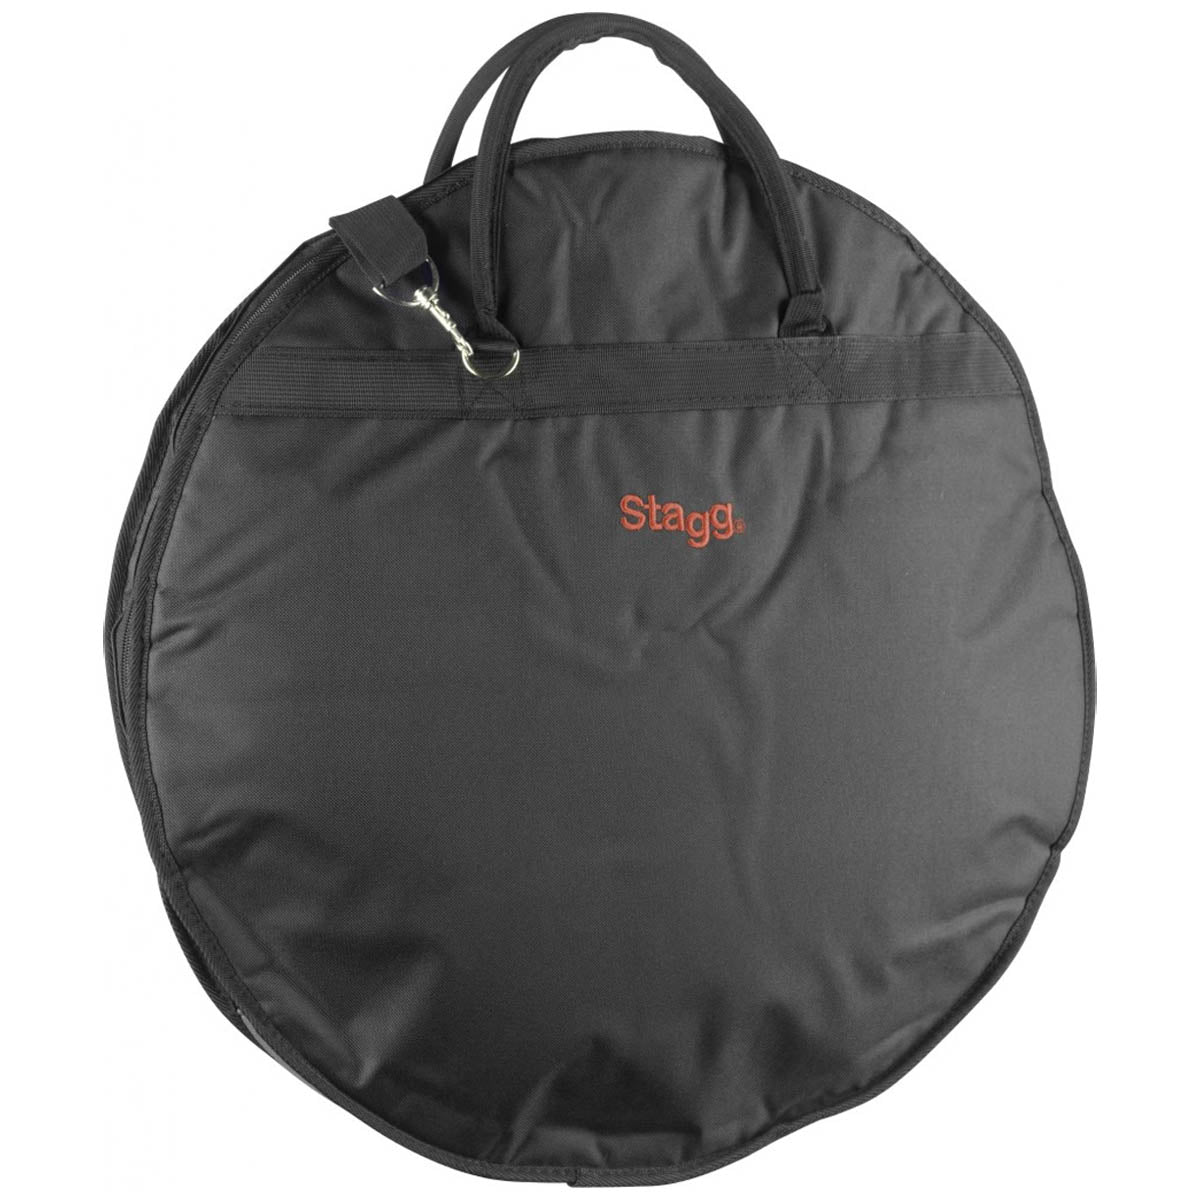 Stagg Economy 22" Cymbal Bag